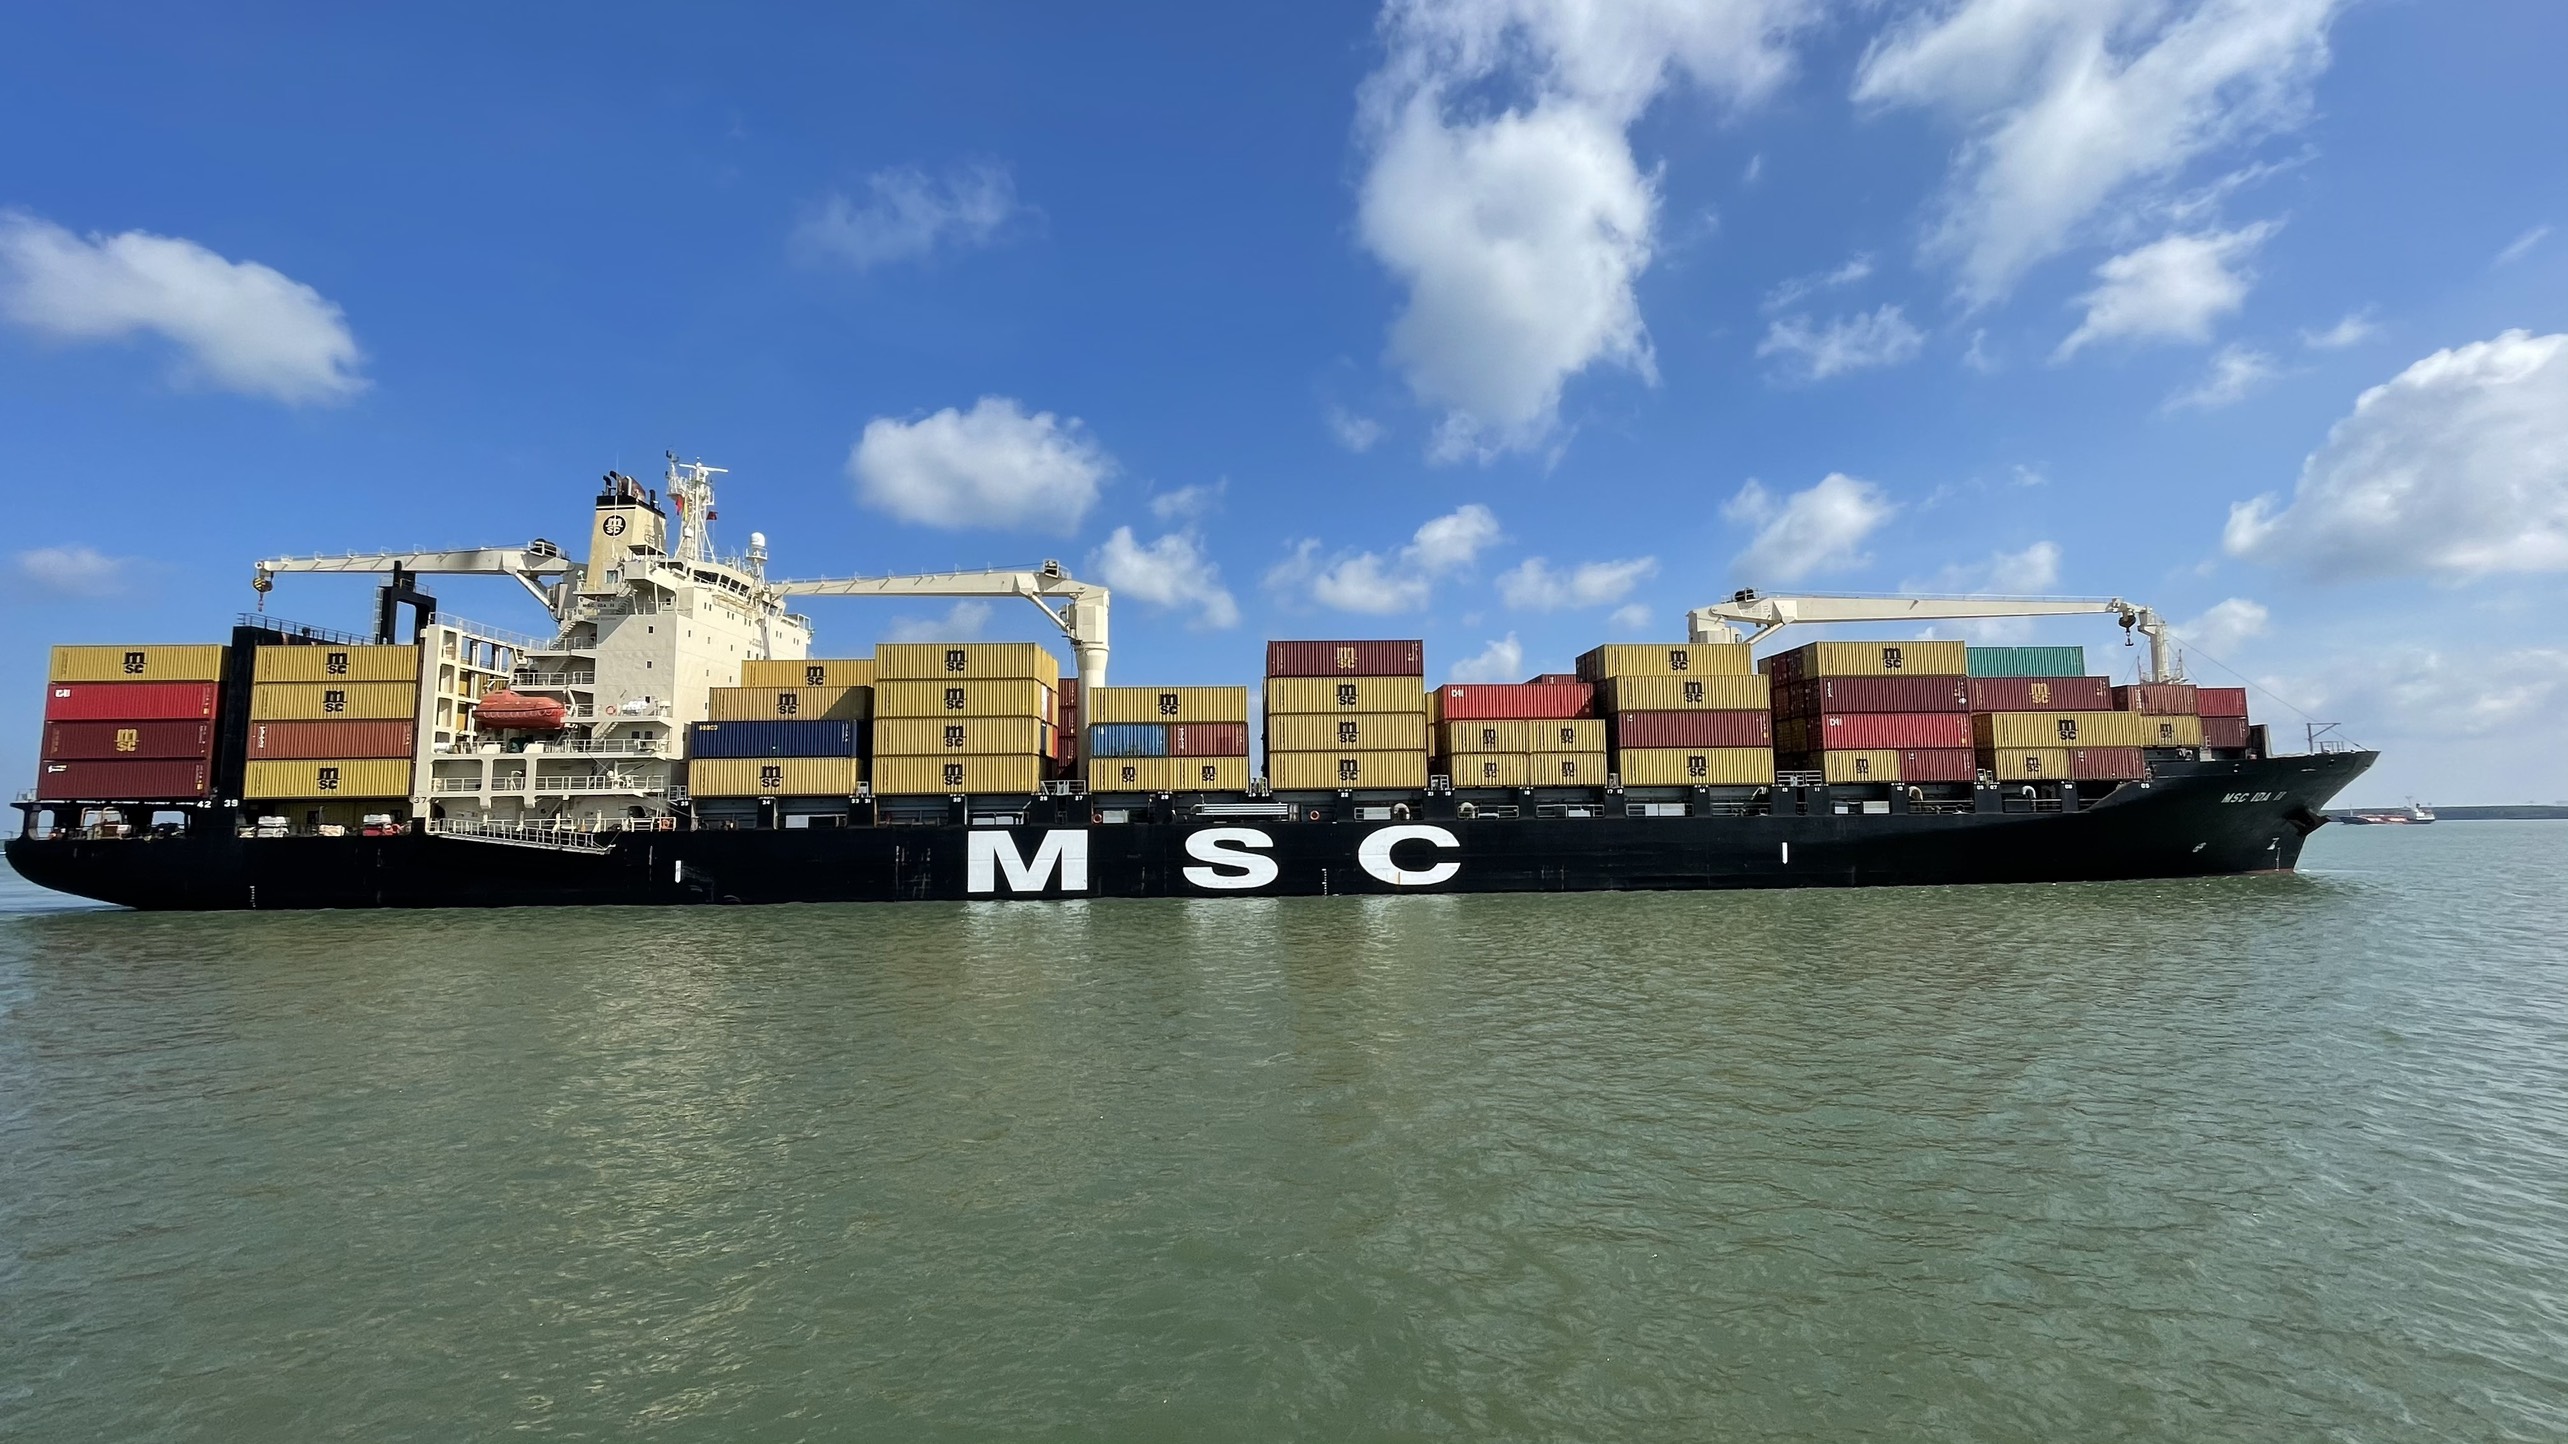 SSIT WELCOMES A NEW INTRA-ASIA SERVICE PERTIWI FROM MSC